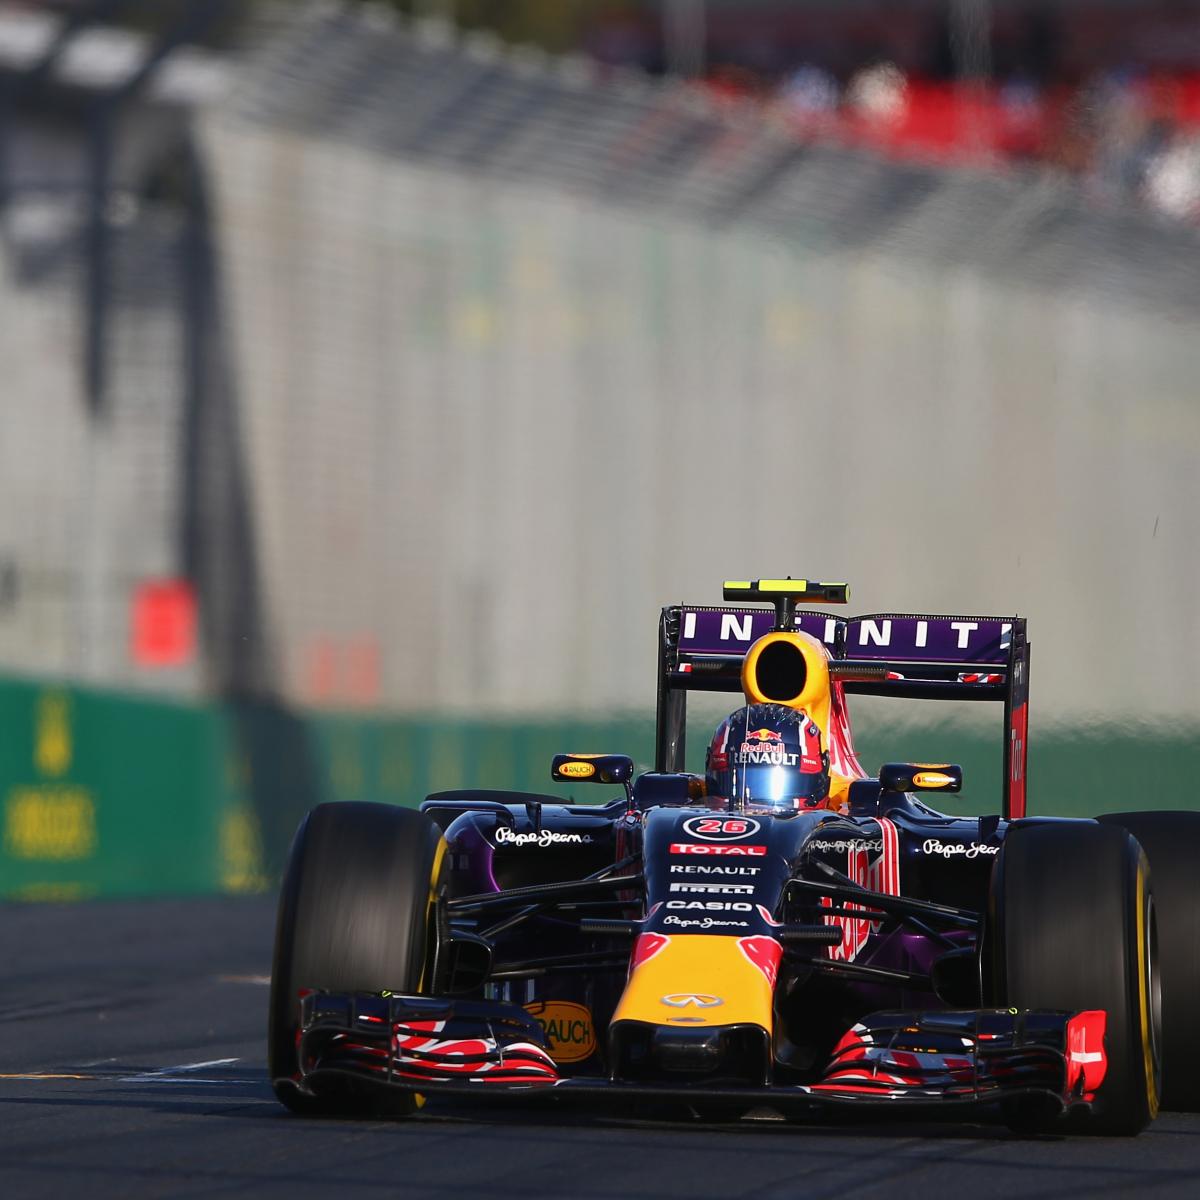 Australian Formula 1 Grand Prix 2015 Results, Times for Practice and